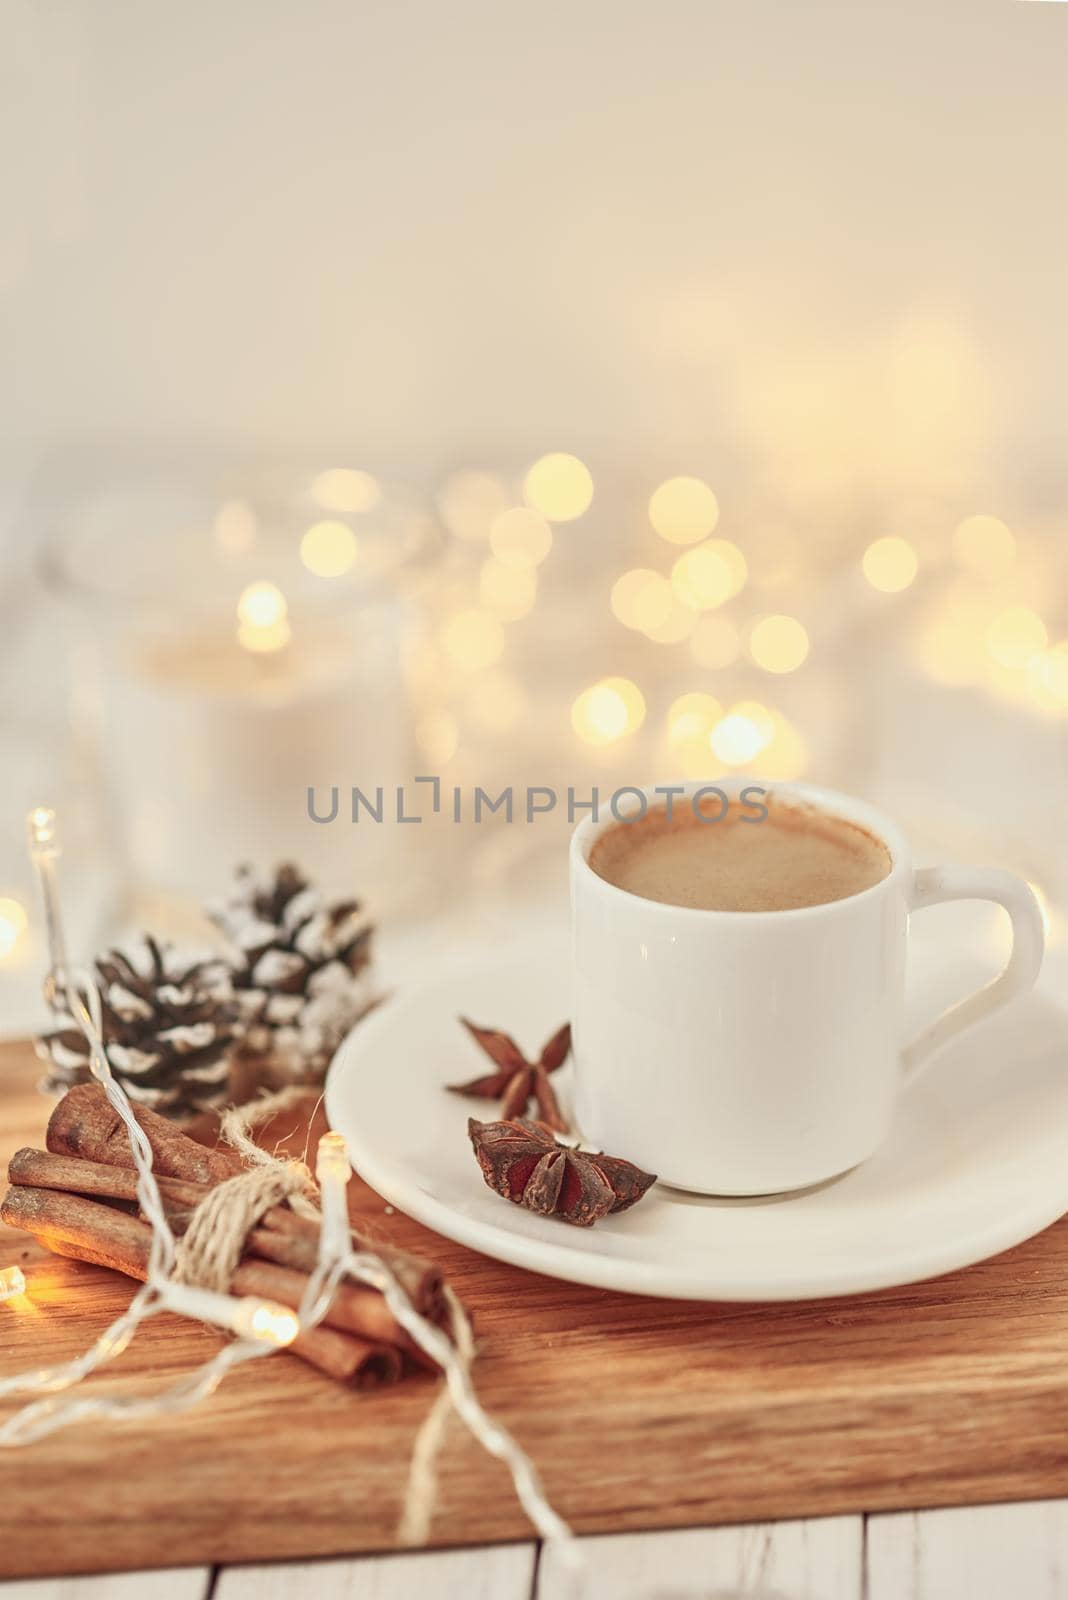 Cup of coffee with garland lights and decoration on table. Cozy home concept